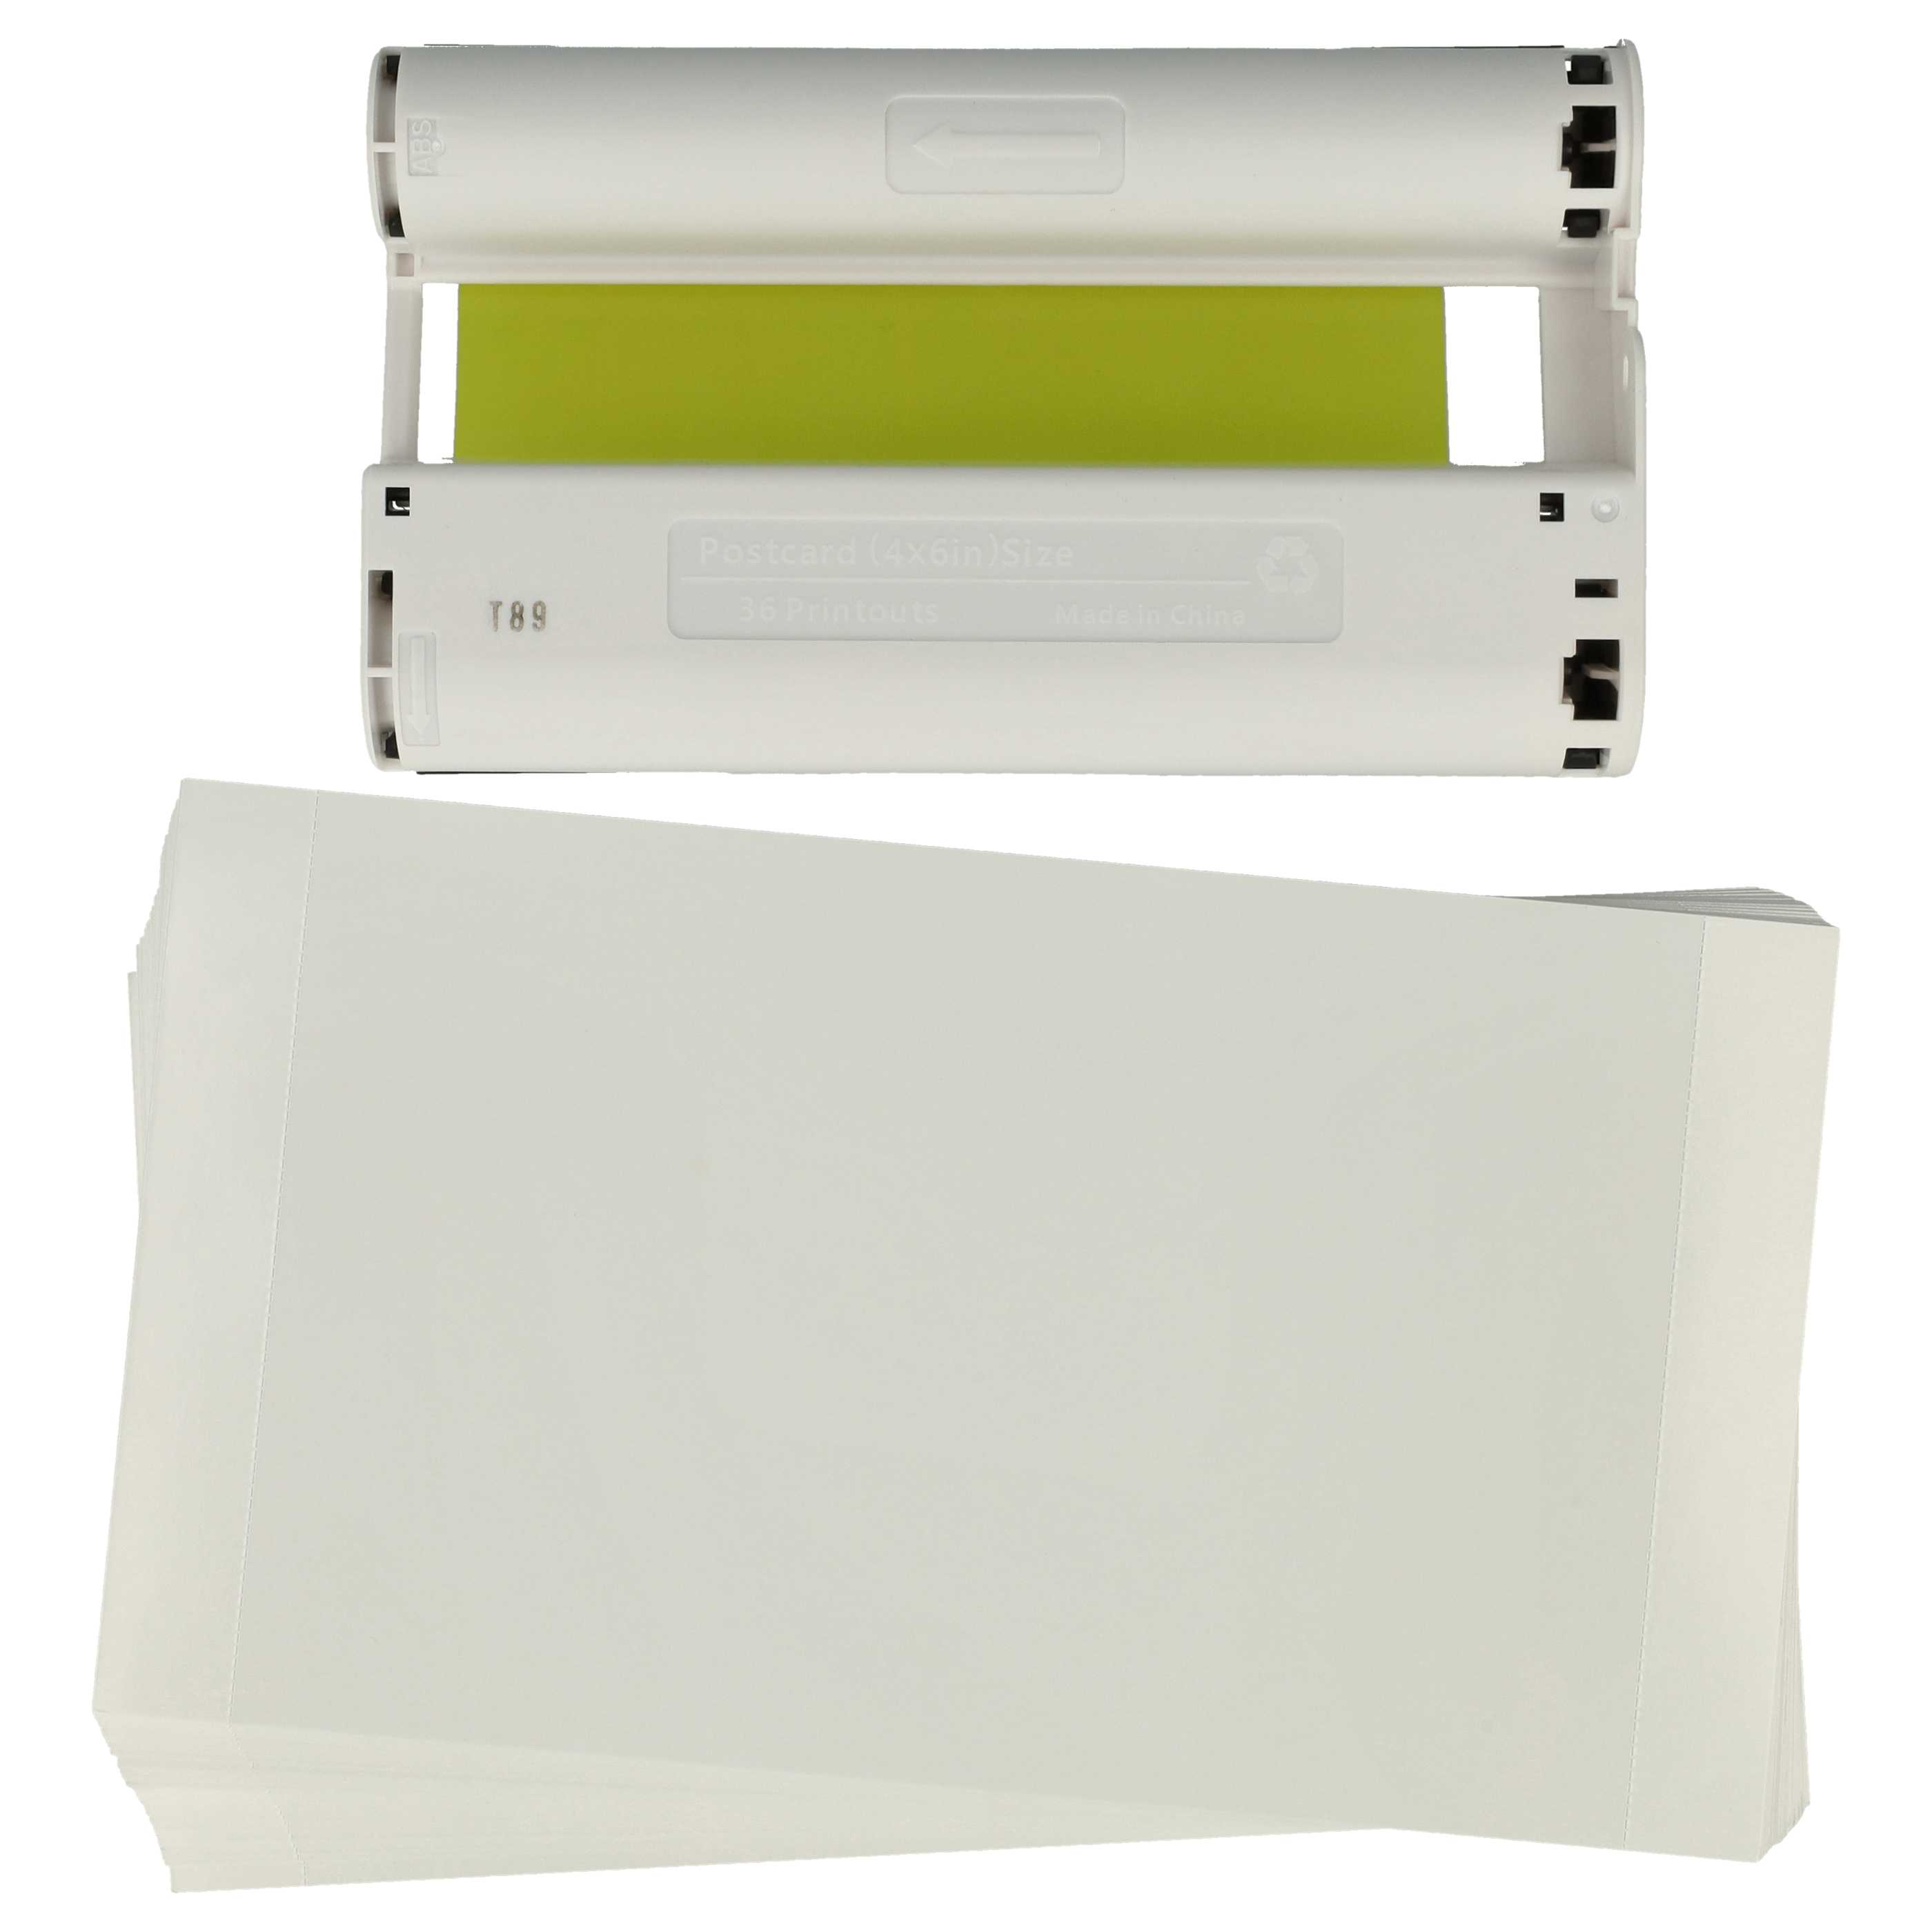 Cartridge replaces Canon 7737A001, KP-36IN for Canon Photo Printer - C/M/Y + 36x Photo Paper Sheet